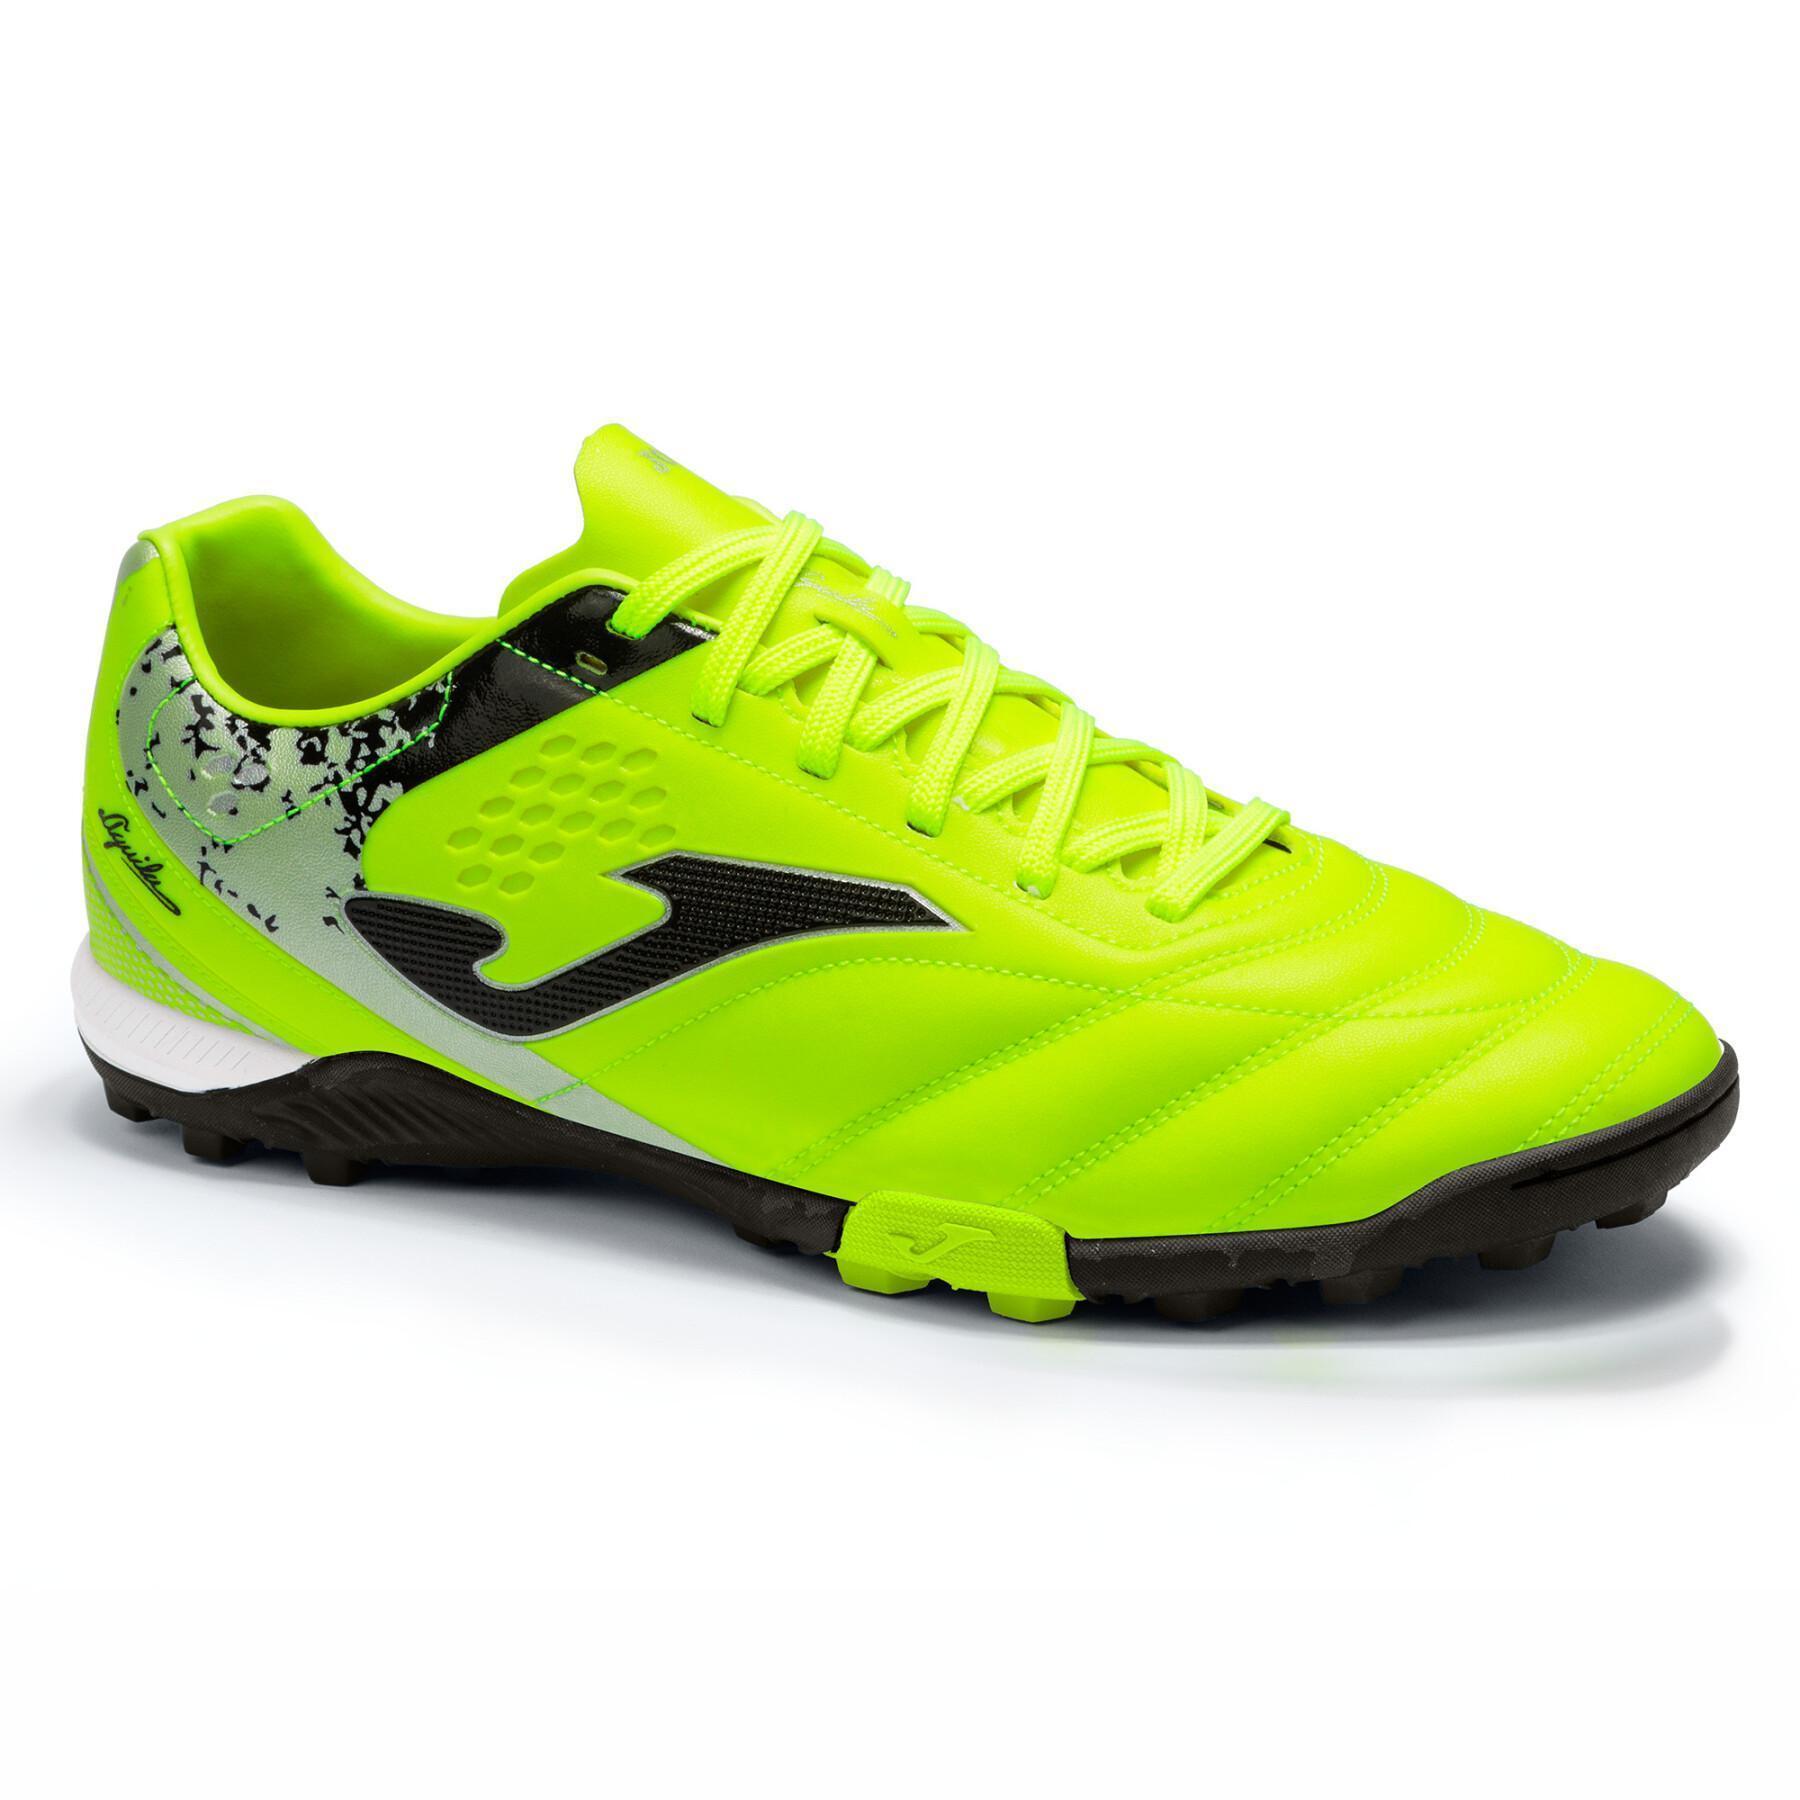 Chaussures Joma Aguila Turf